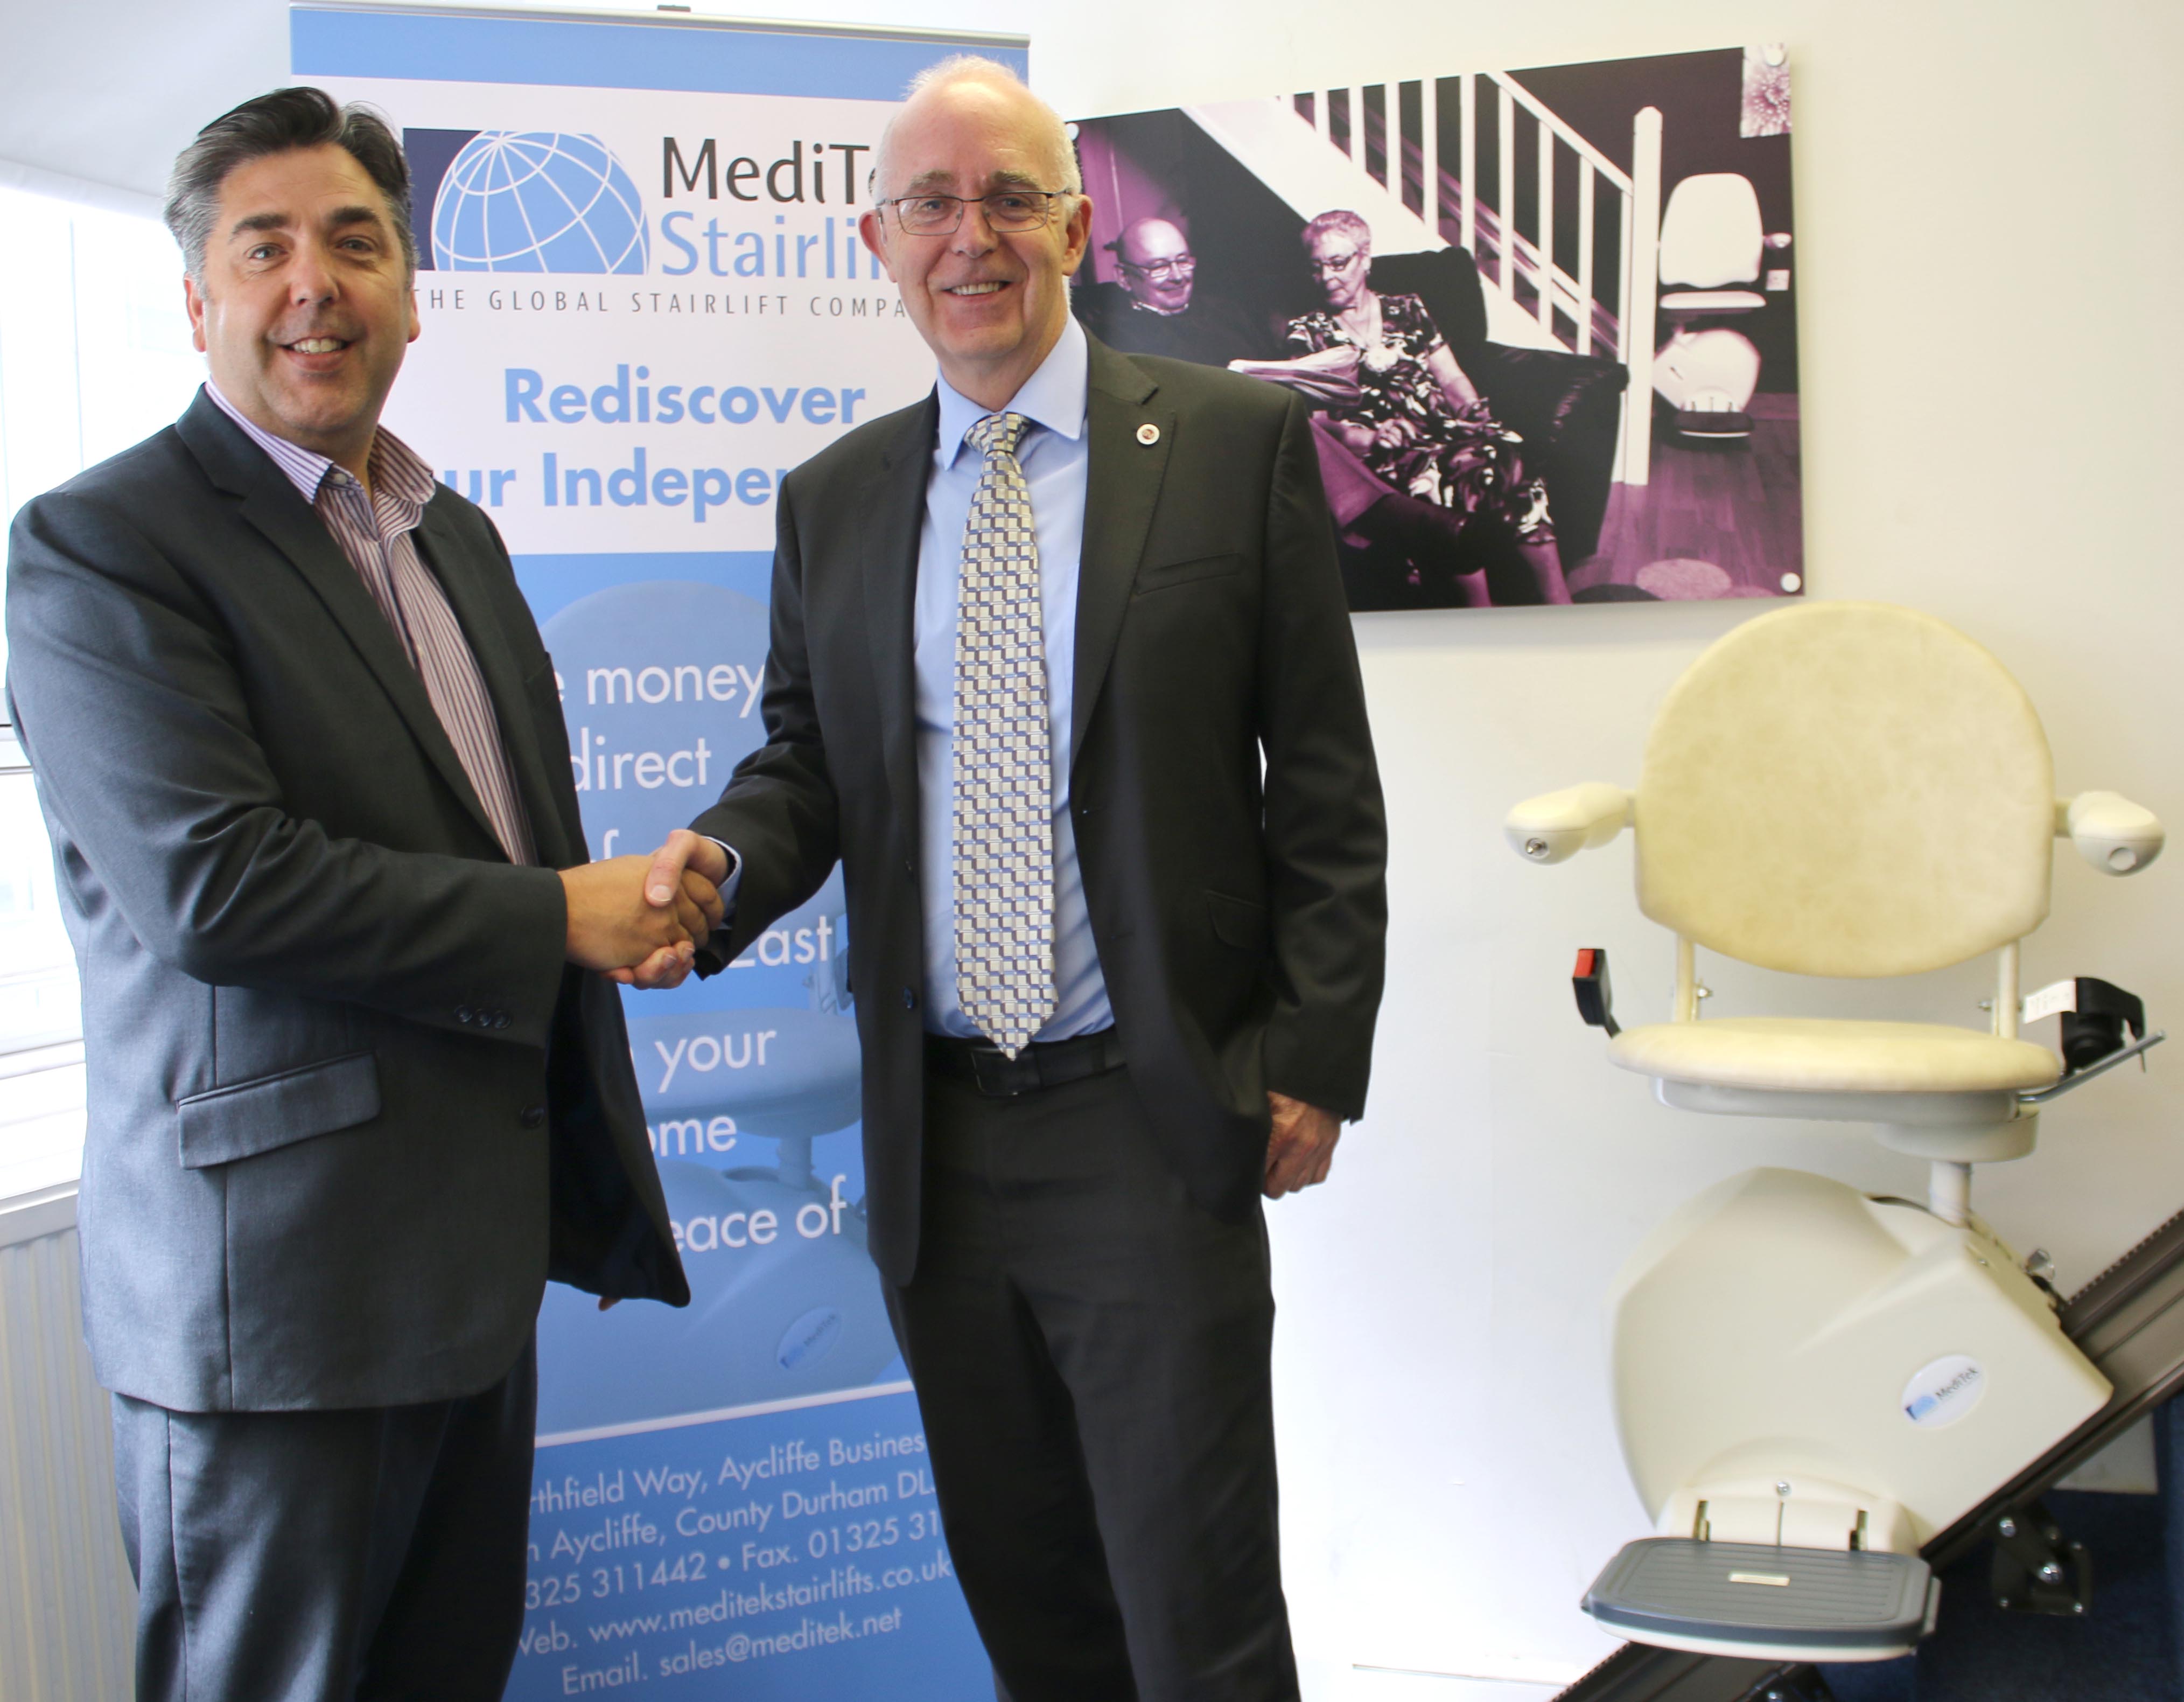 MEDITEK Stairlifts at Aycliffe Keep Moving up